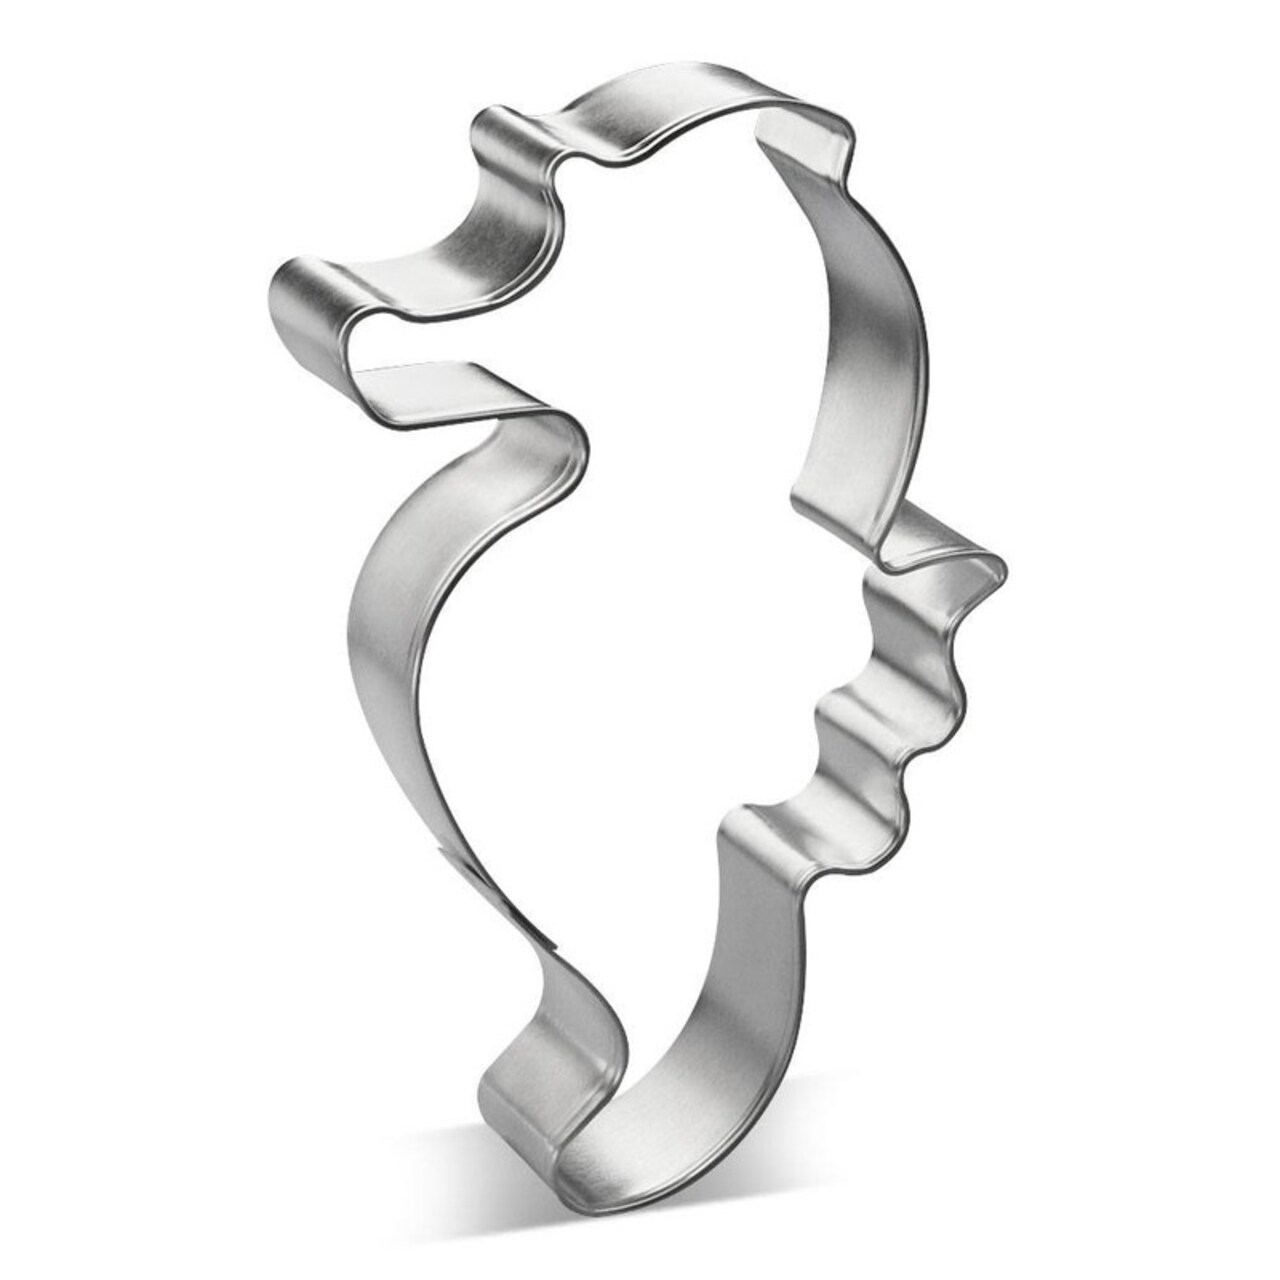 Seahorse Cookie Cutter 4.5 in, CookieCutter.com, Tin Plated Steel, Handmade in the USA